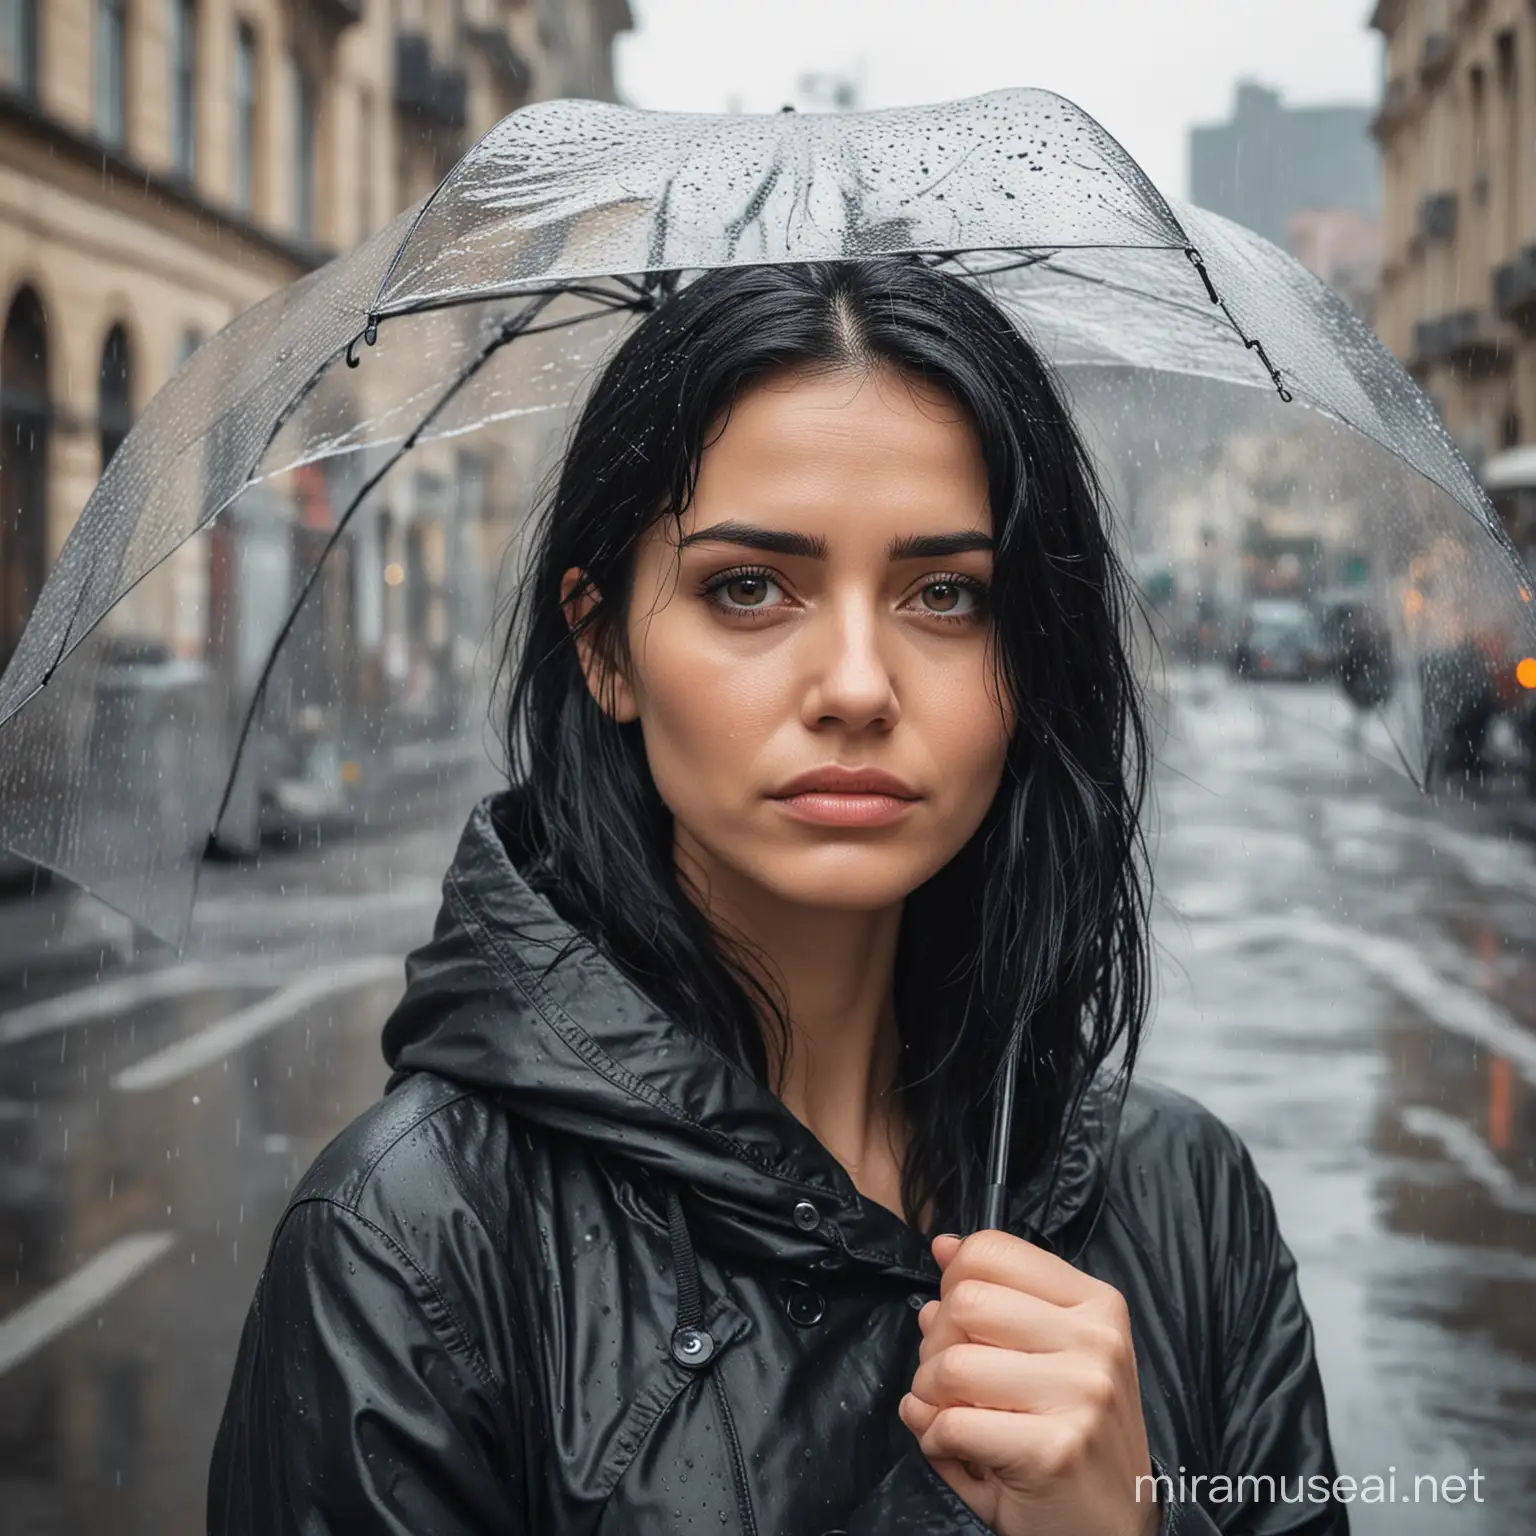 Sad woman with black hair on a rainy day in the city without umbrella